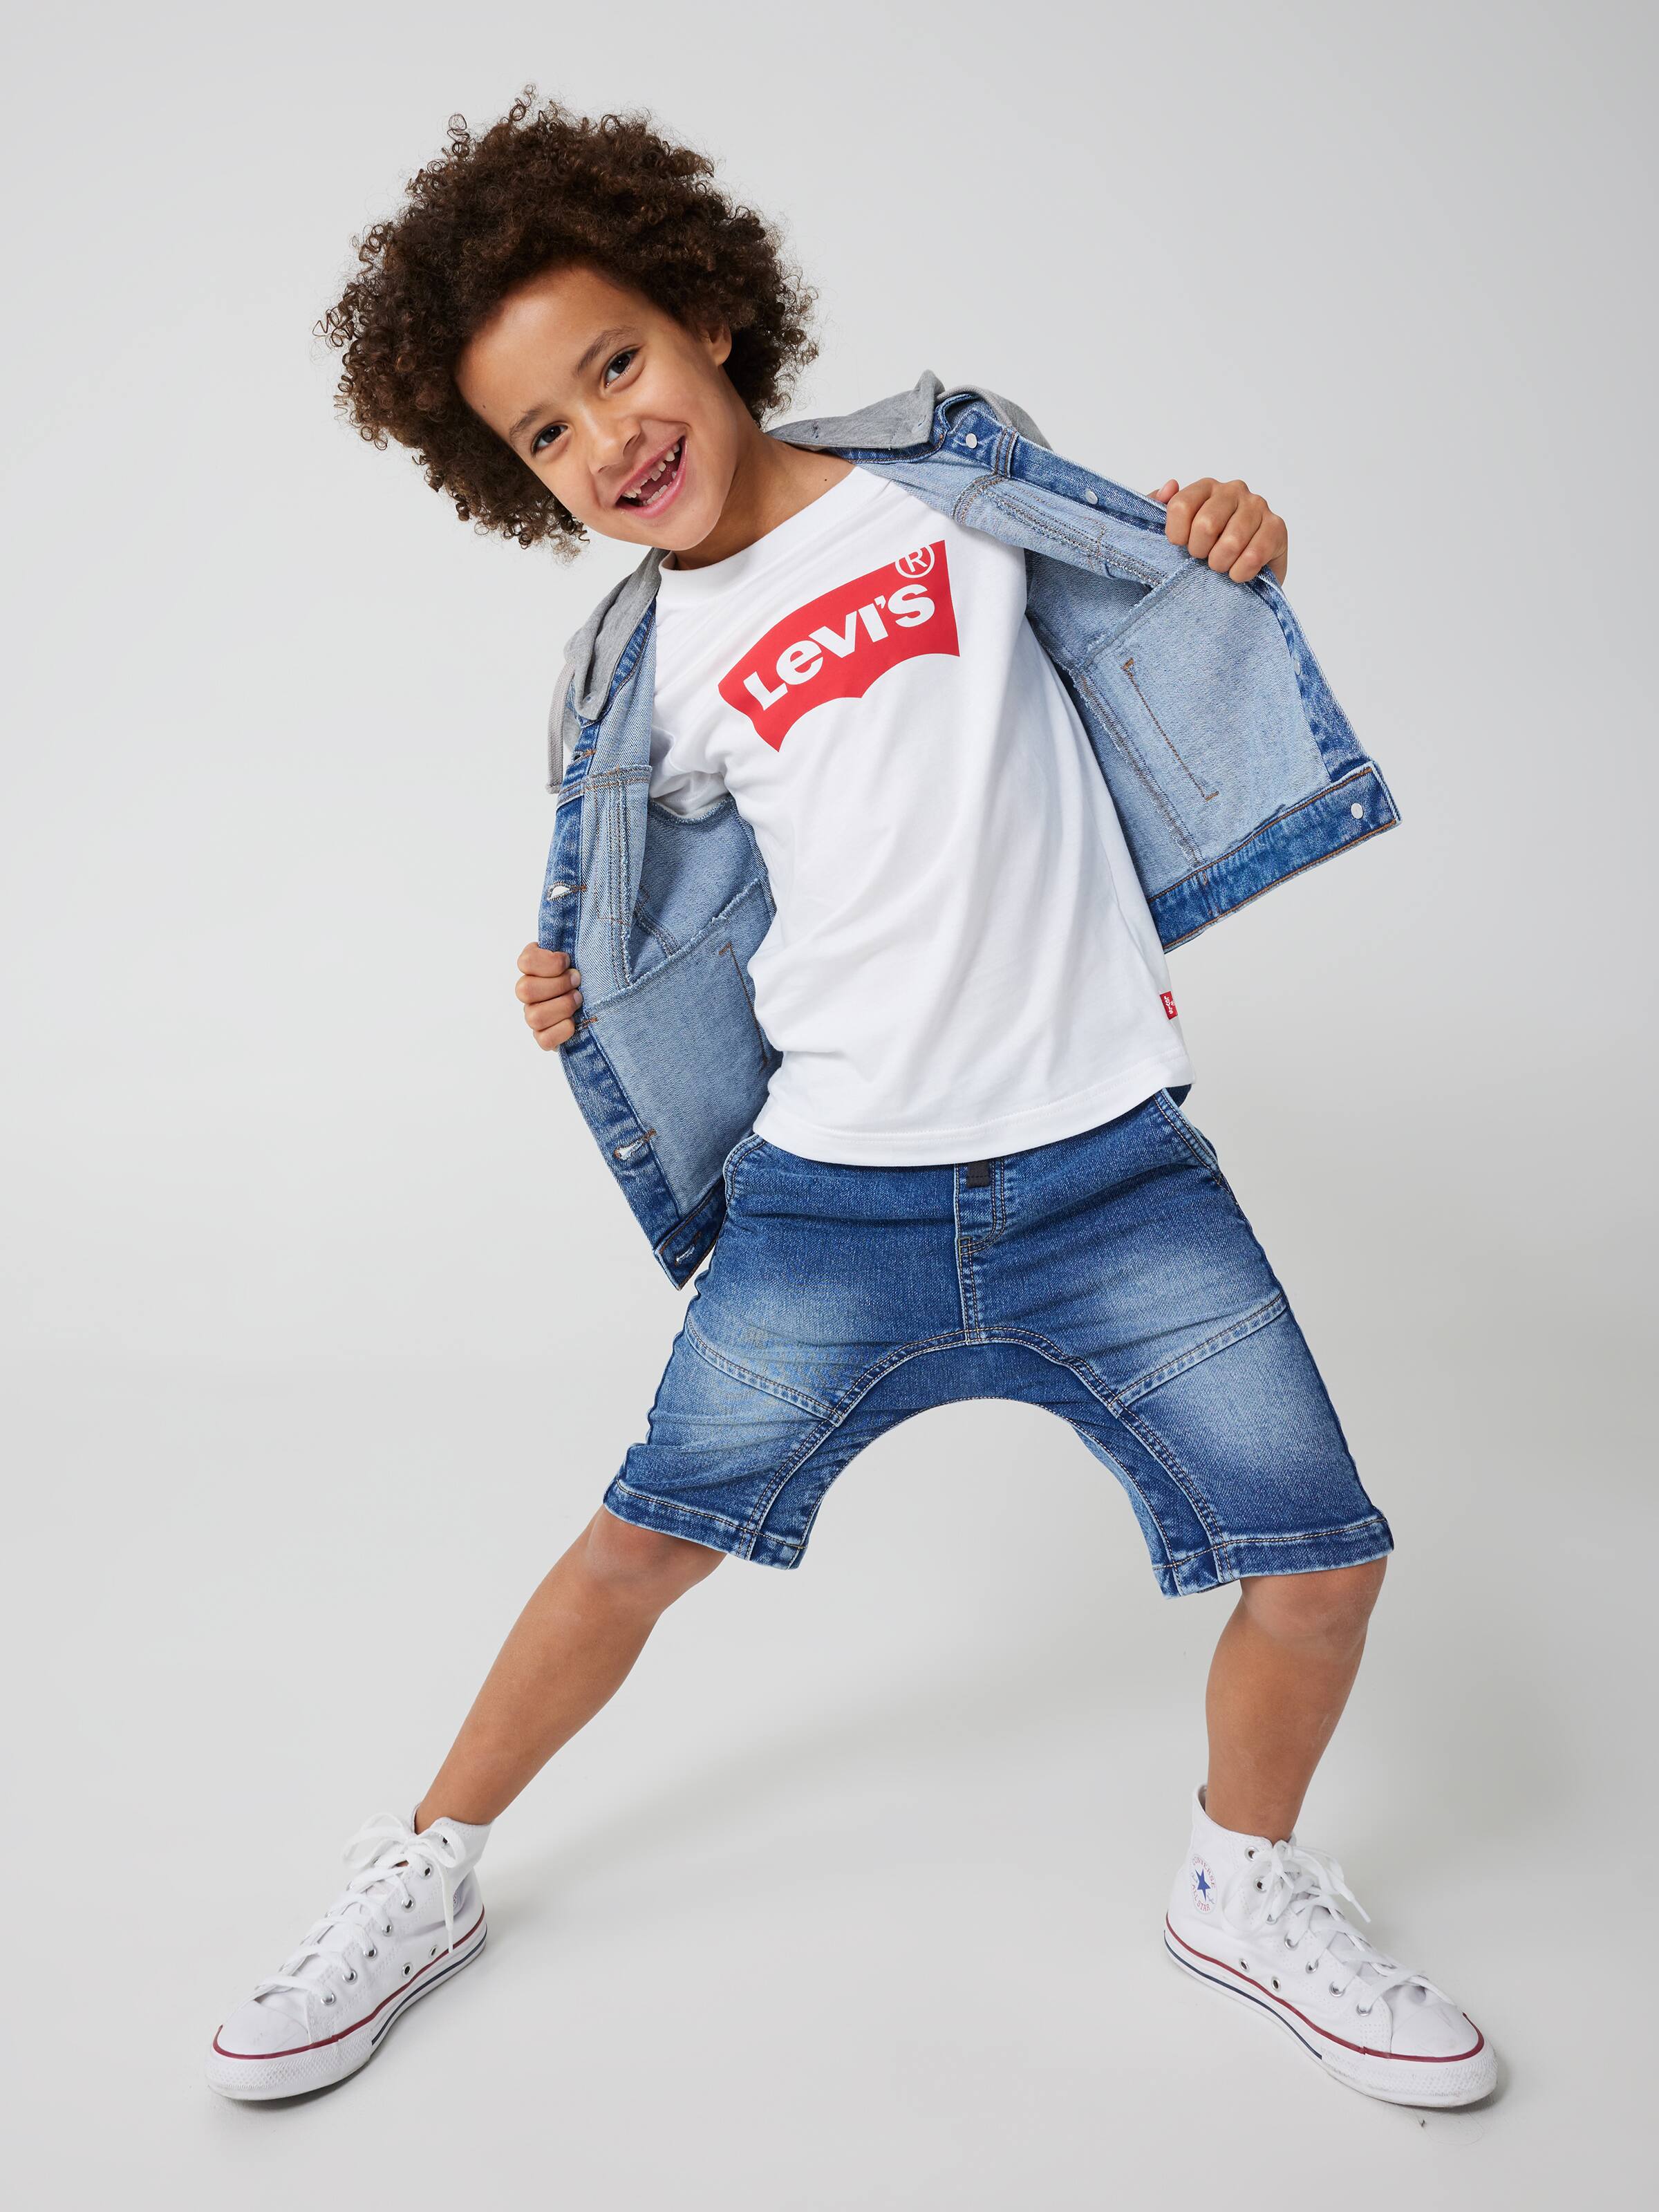 Kids Levi's Jeans & Clothing | Just Jeans